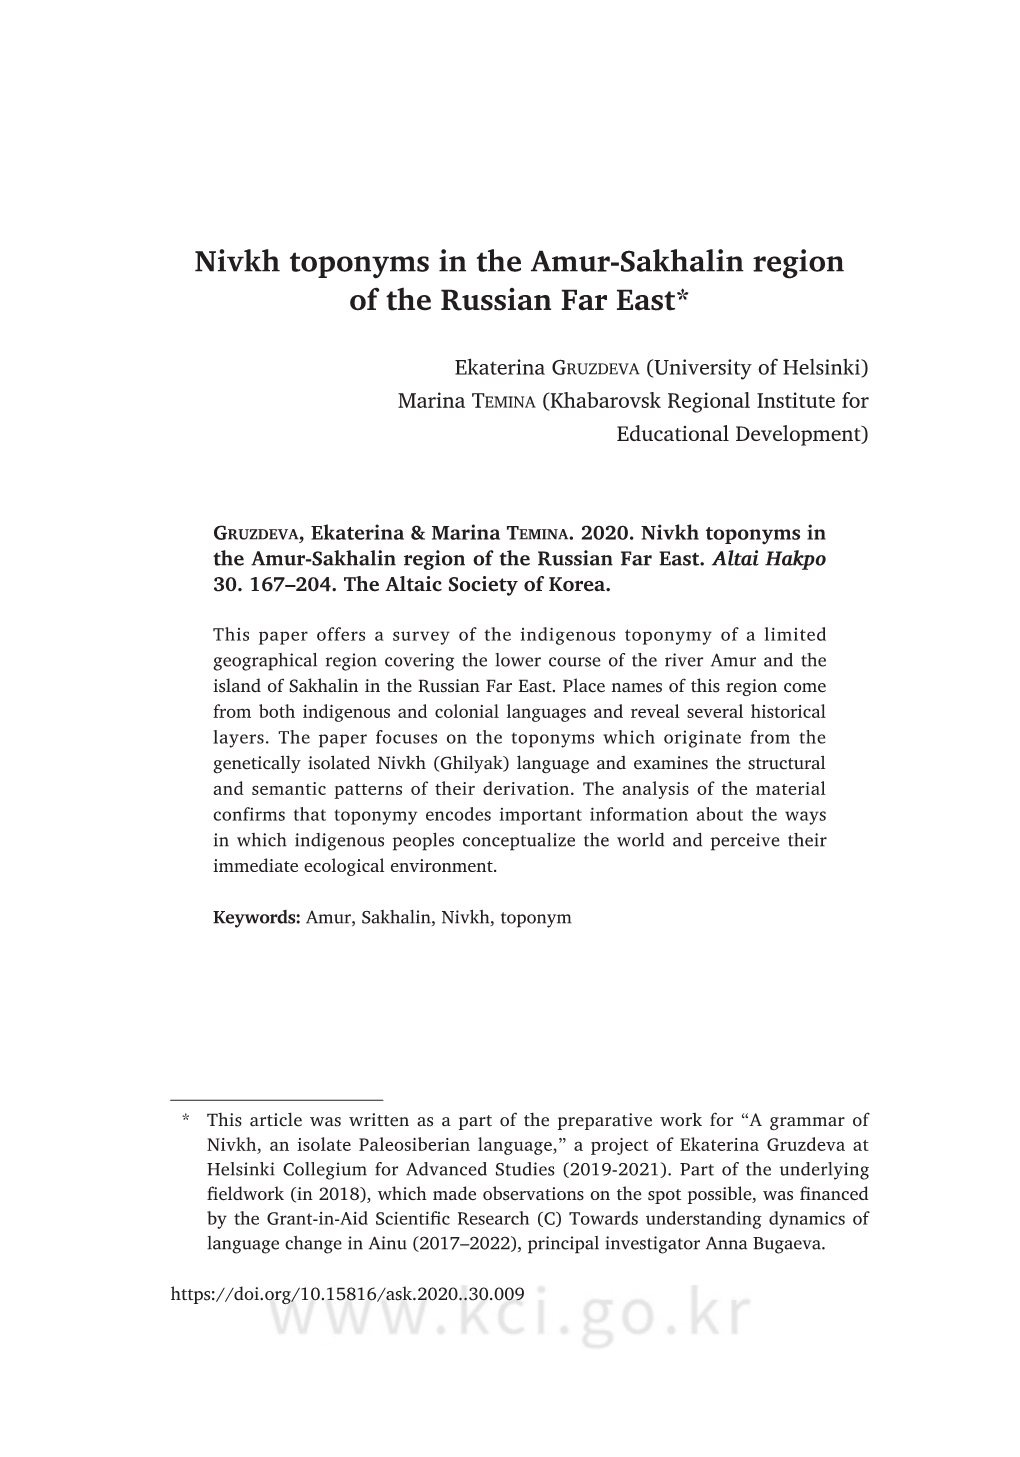 Nivkh Toponyms in the Amur-Sakhalin Region of the Russian Far East*